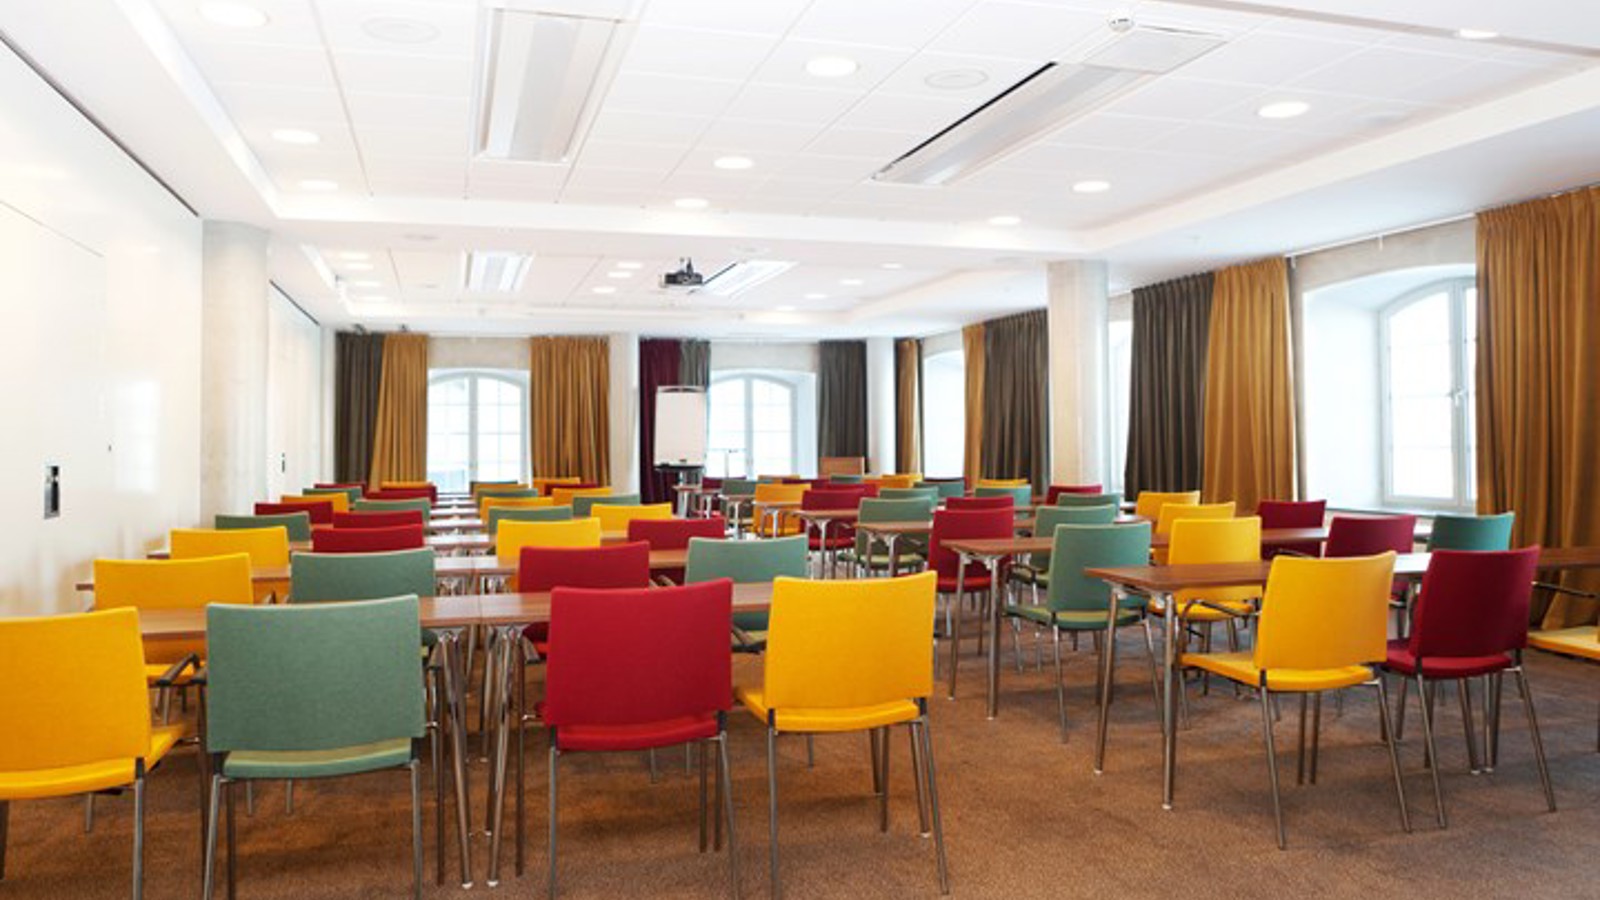 Conference room with lined up chairs, colorful chairs and large windows